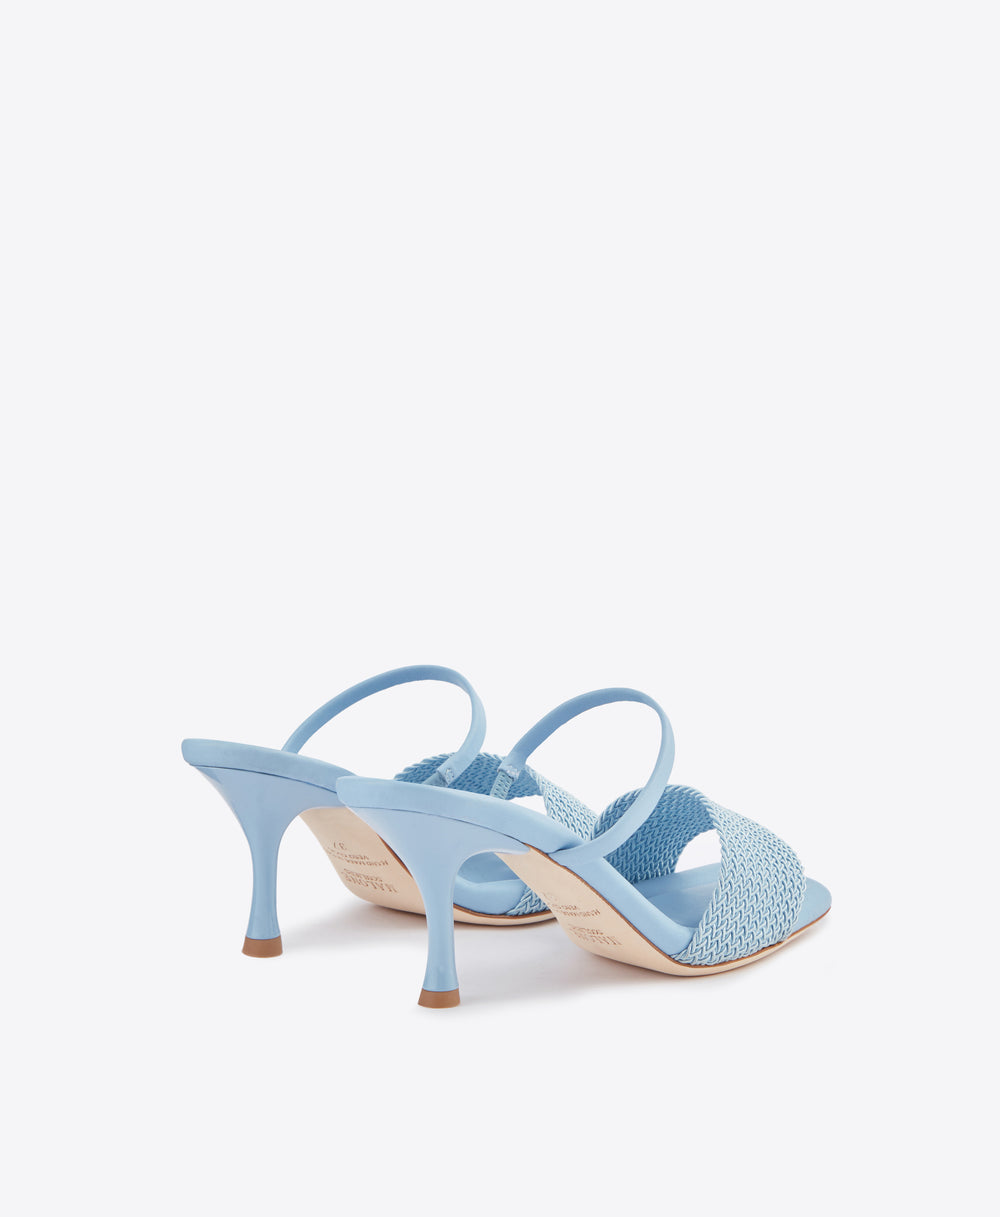 Women's Blue Leather Heeled Sandals Malone Souliers